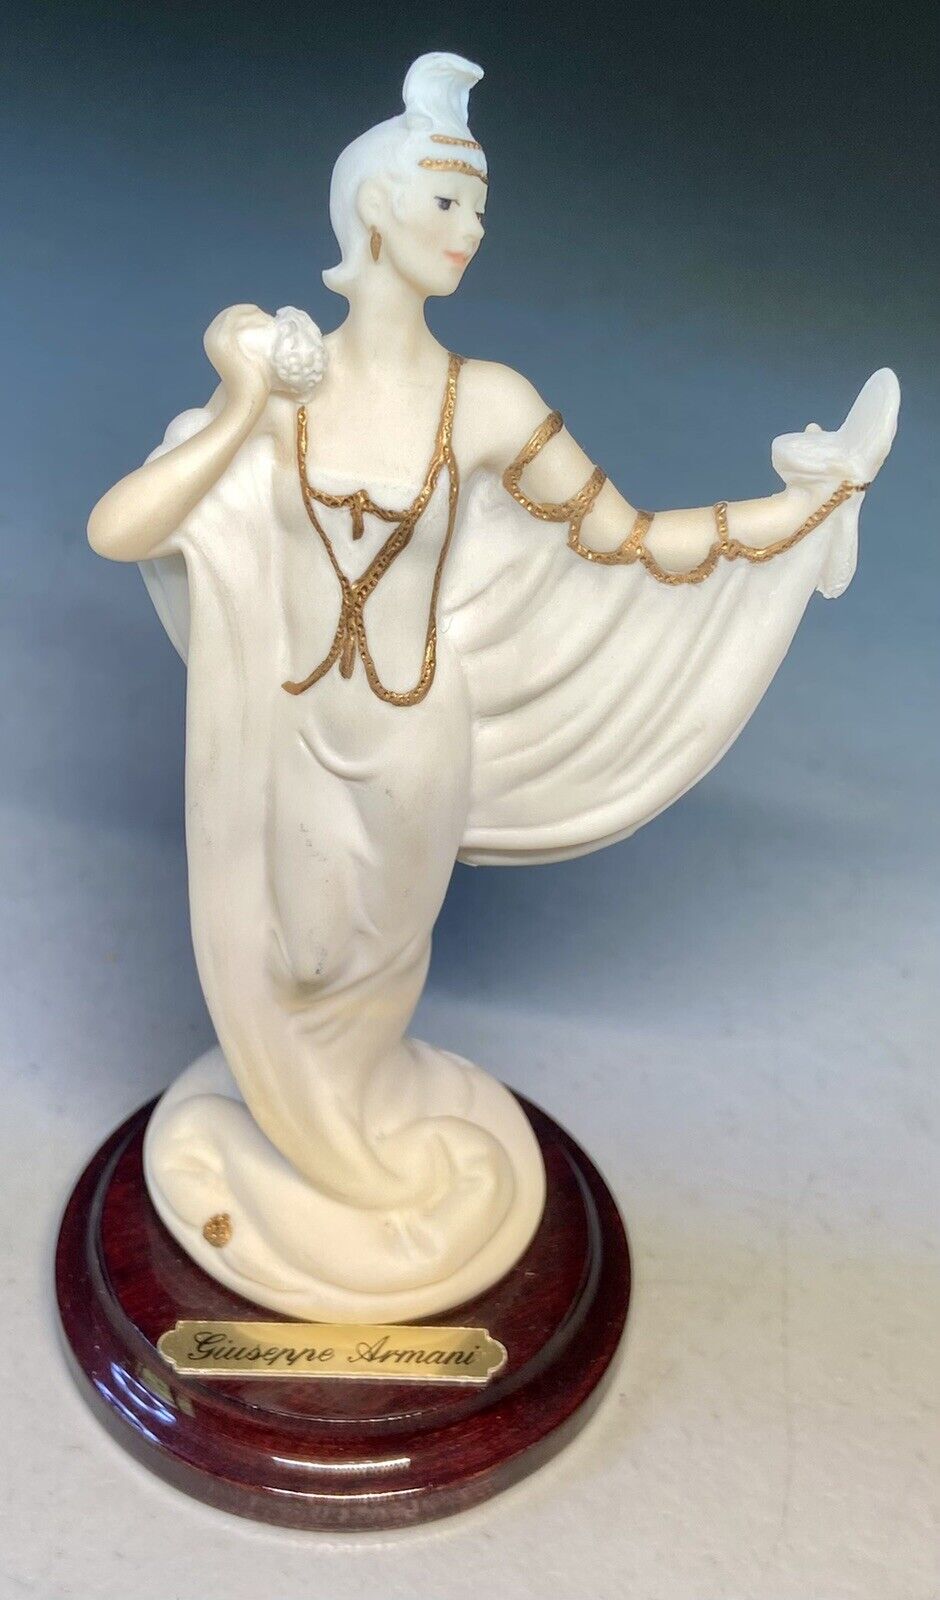 Vtg 1994 Giuseppe Armani 5” Small Figurine Lady With Powder Puff Florence Italy